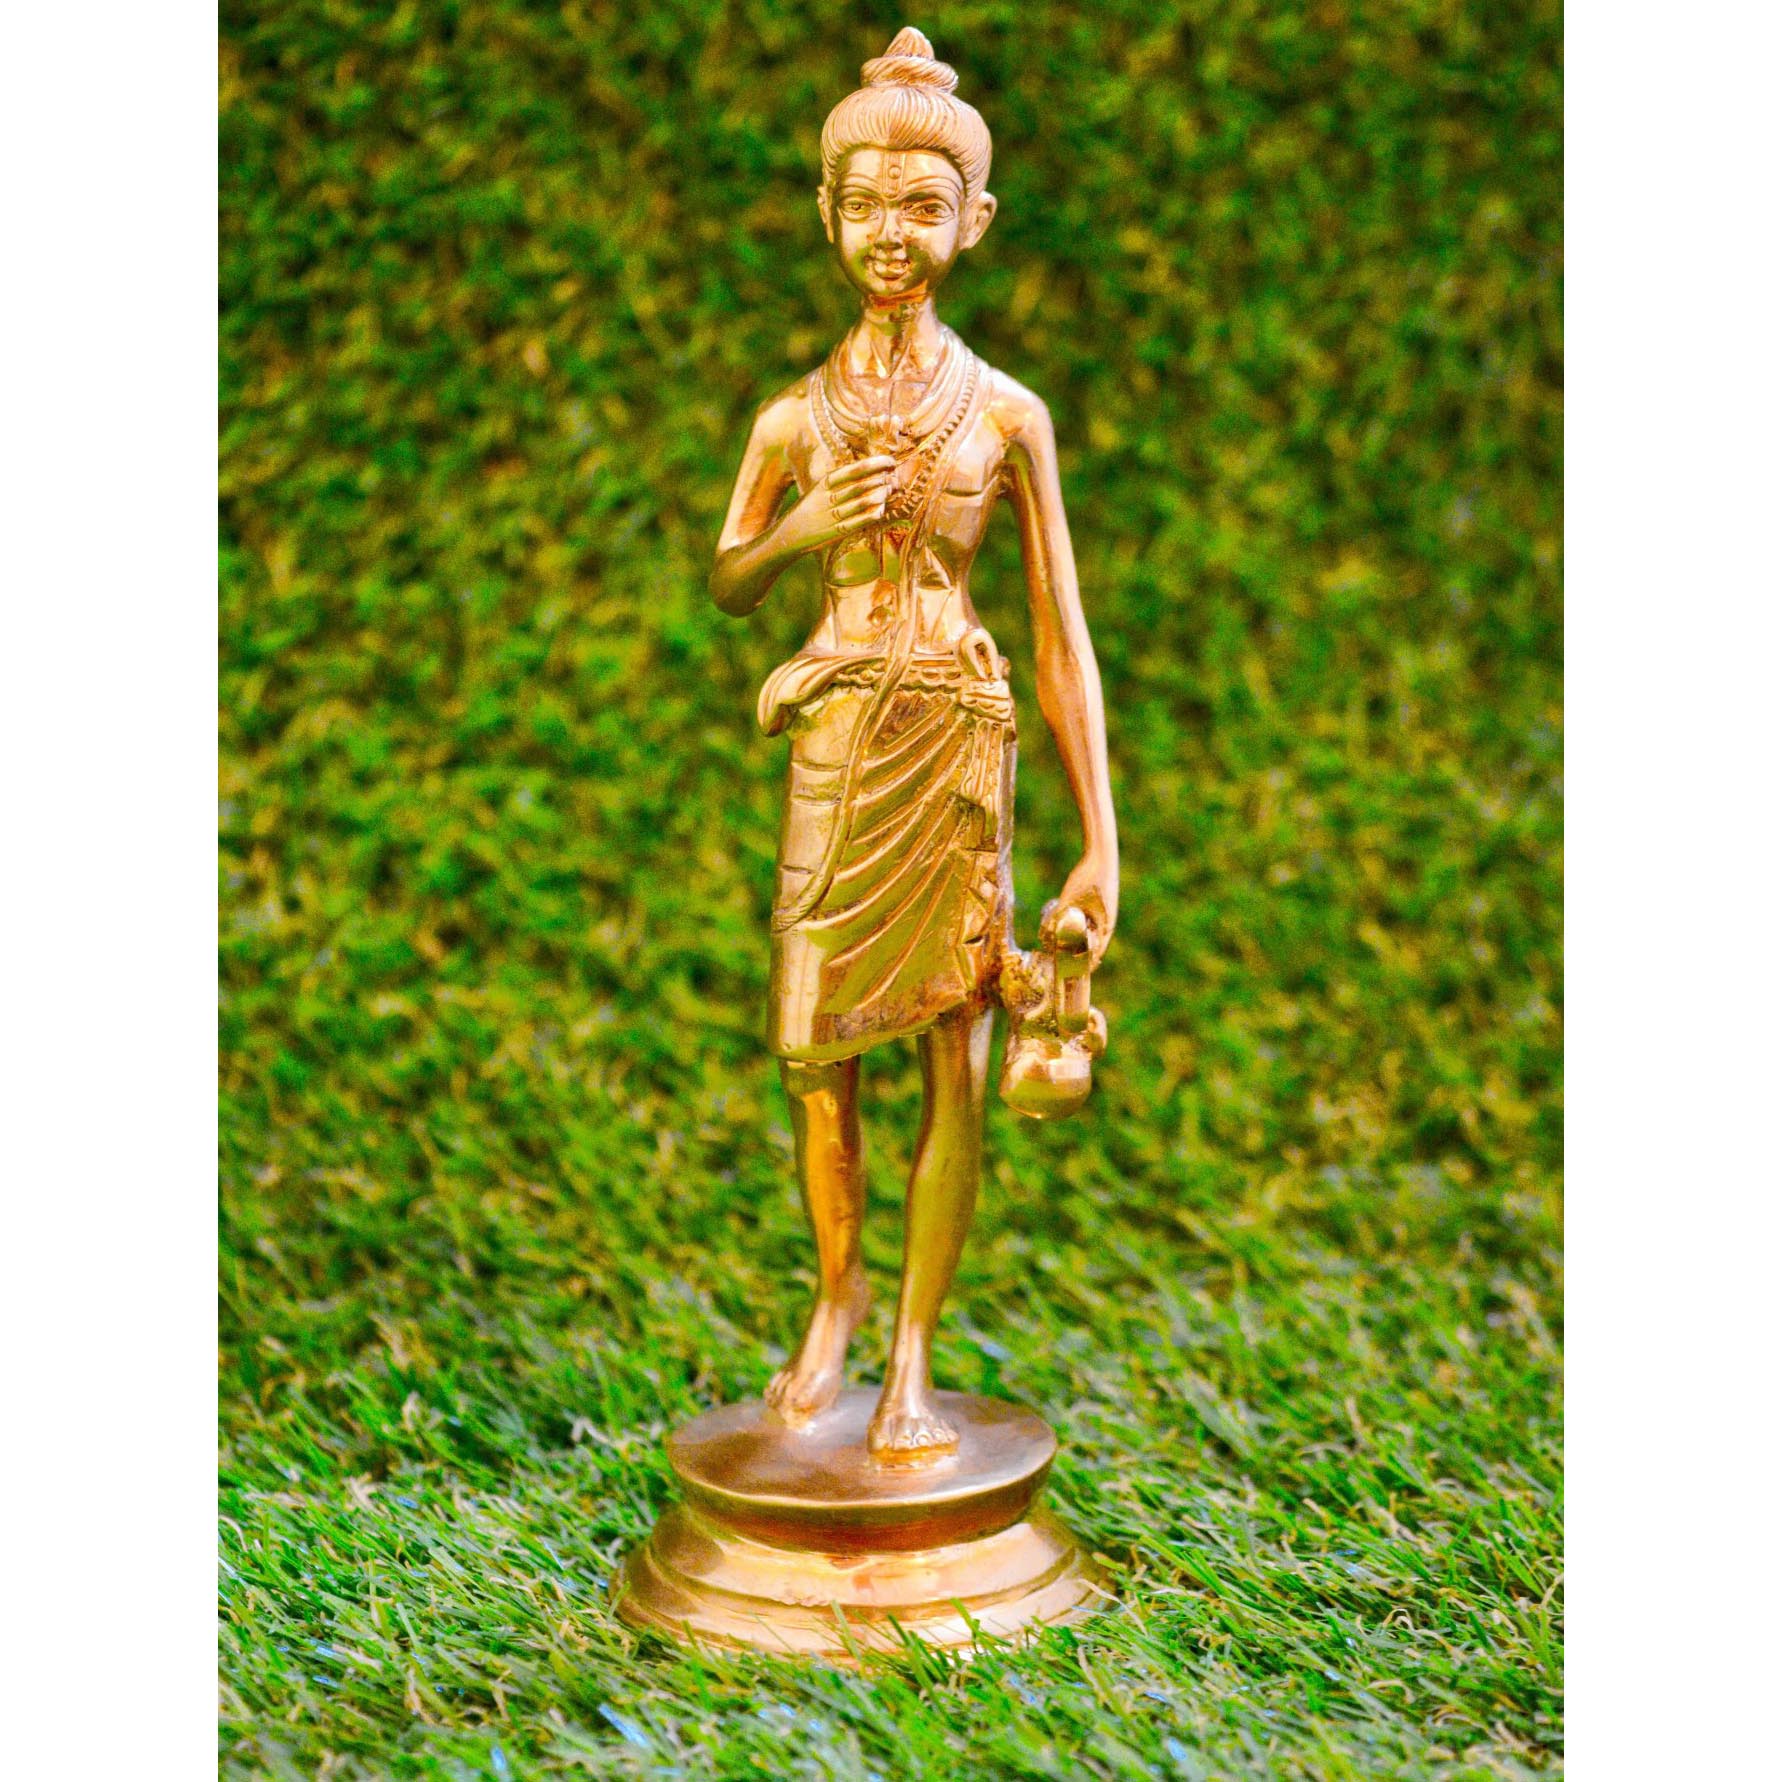 Buy Decorative Colourful Brass Durga Idol Online in India 